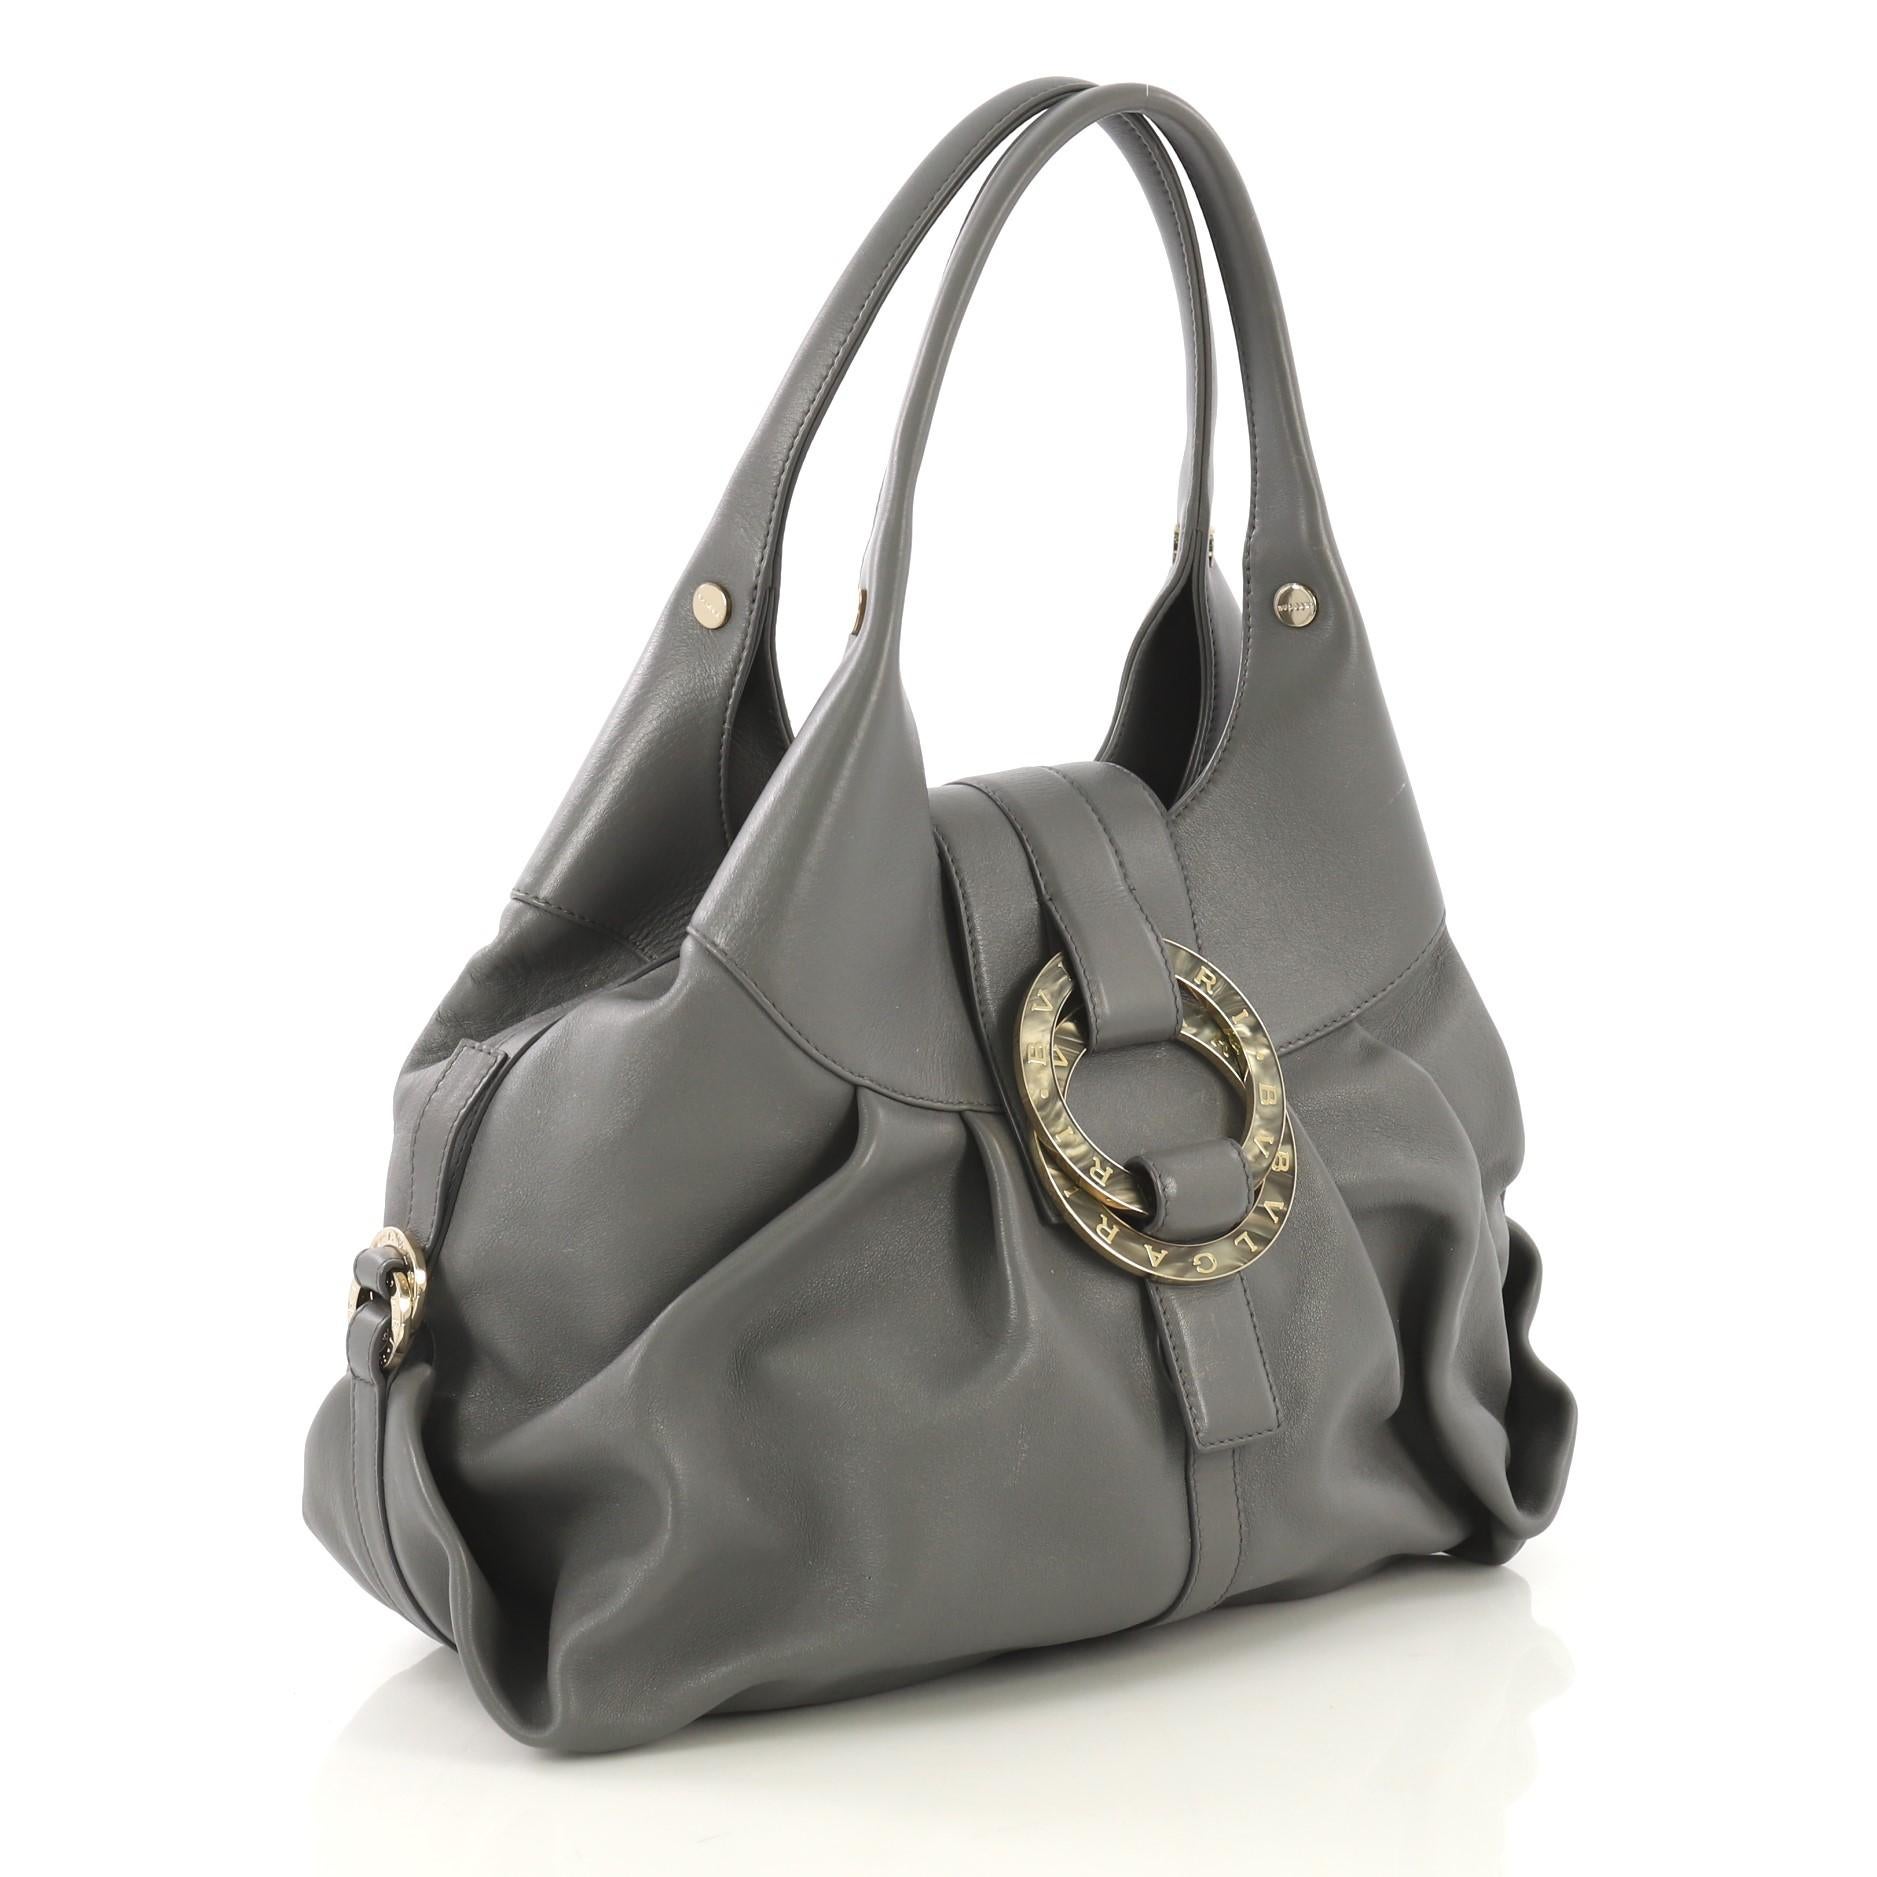 This Bvlgari Chandra Hobo Leather Large, crafted from gray leather, features dual leather handles, double metal ring details with engraved Bvlgari signature, and gold-tone hardware. Its hook closure opens to a red fabric interior with side zip